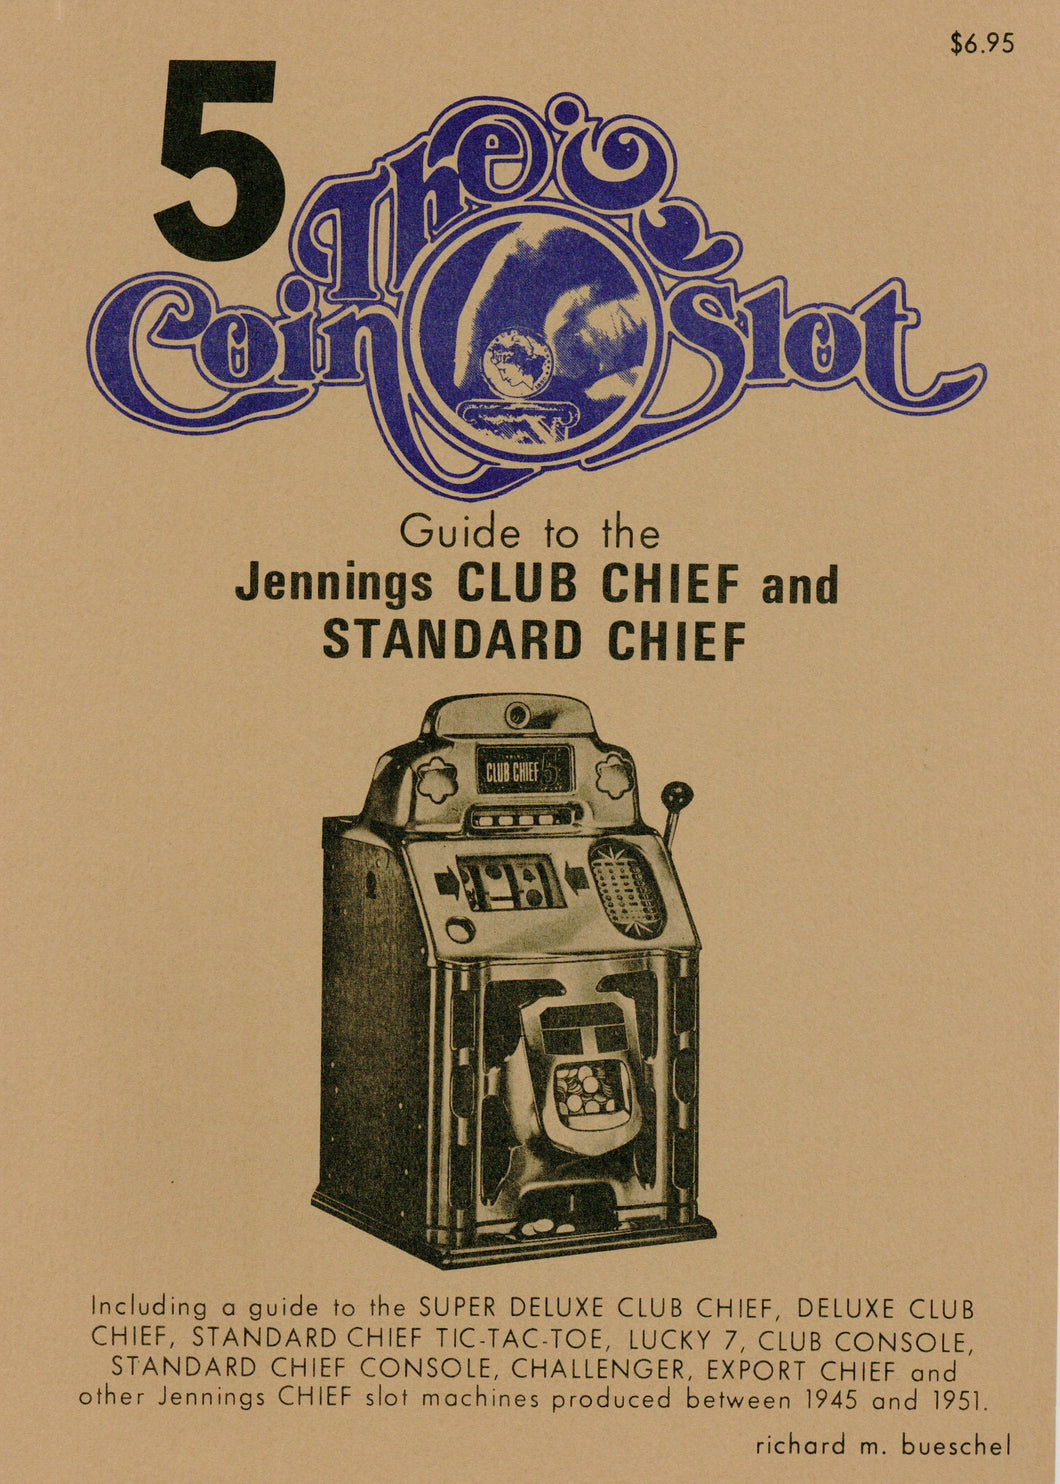 Coin Slot # 5. Guide to the Jennings Club Chief and Standard Chief (Very Limited Quantities)